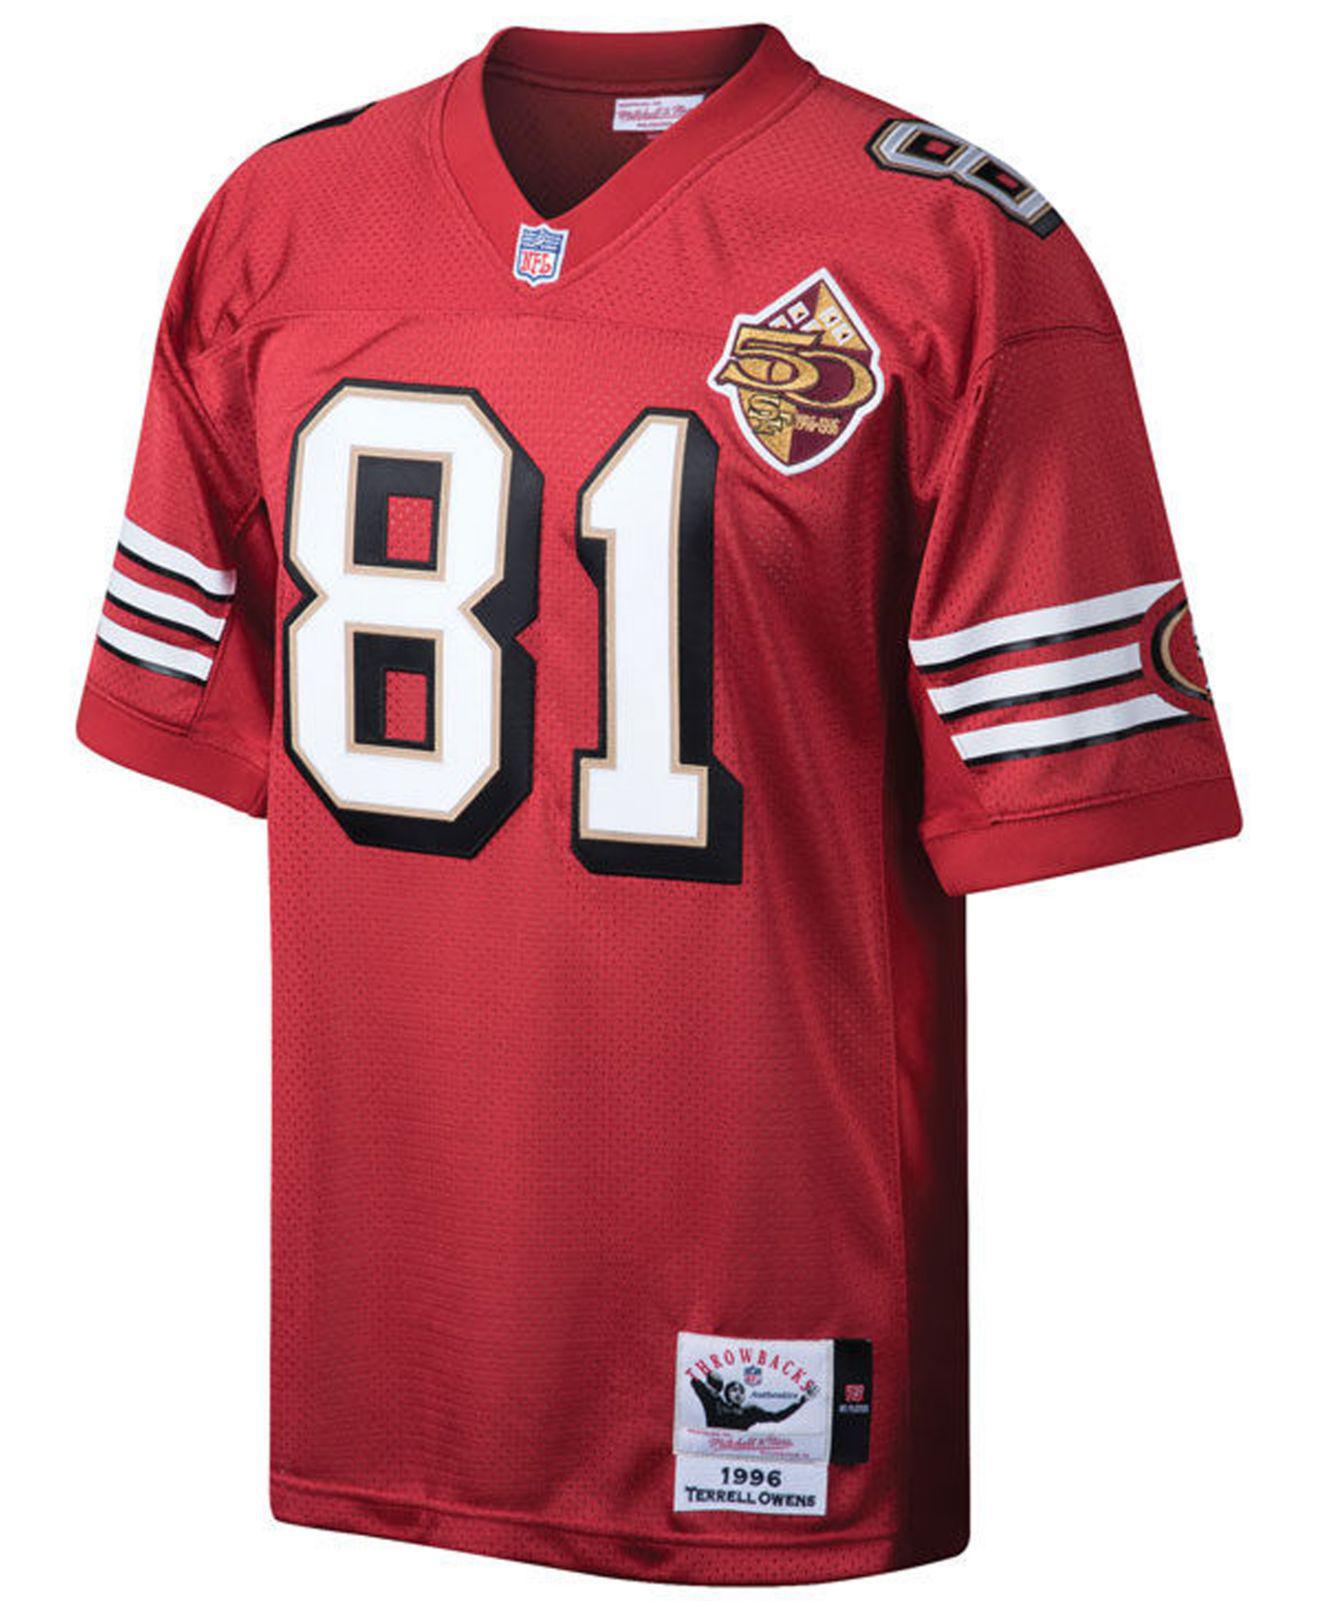 Terrell Owens San Francisco 49ers Authentic Football Jersey